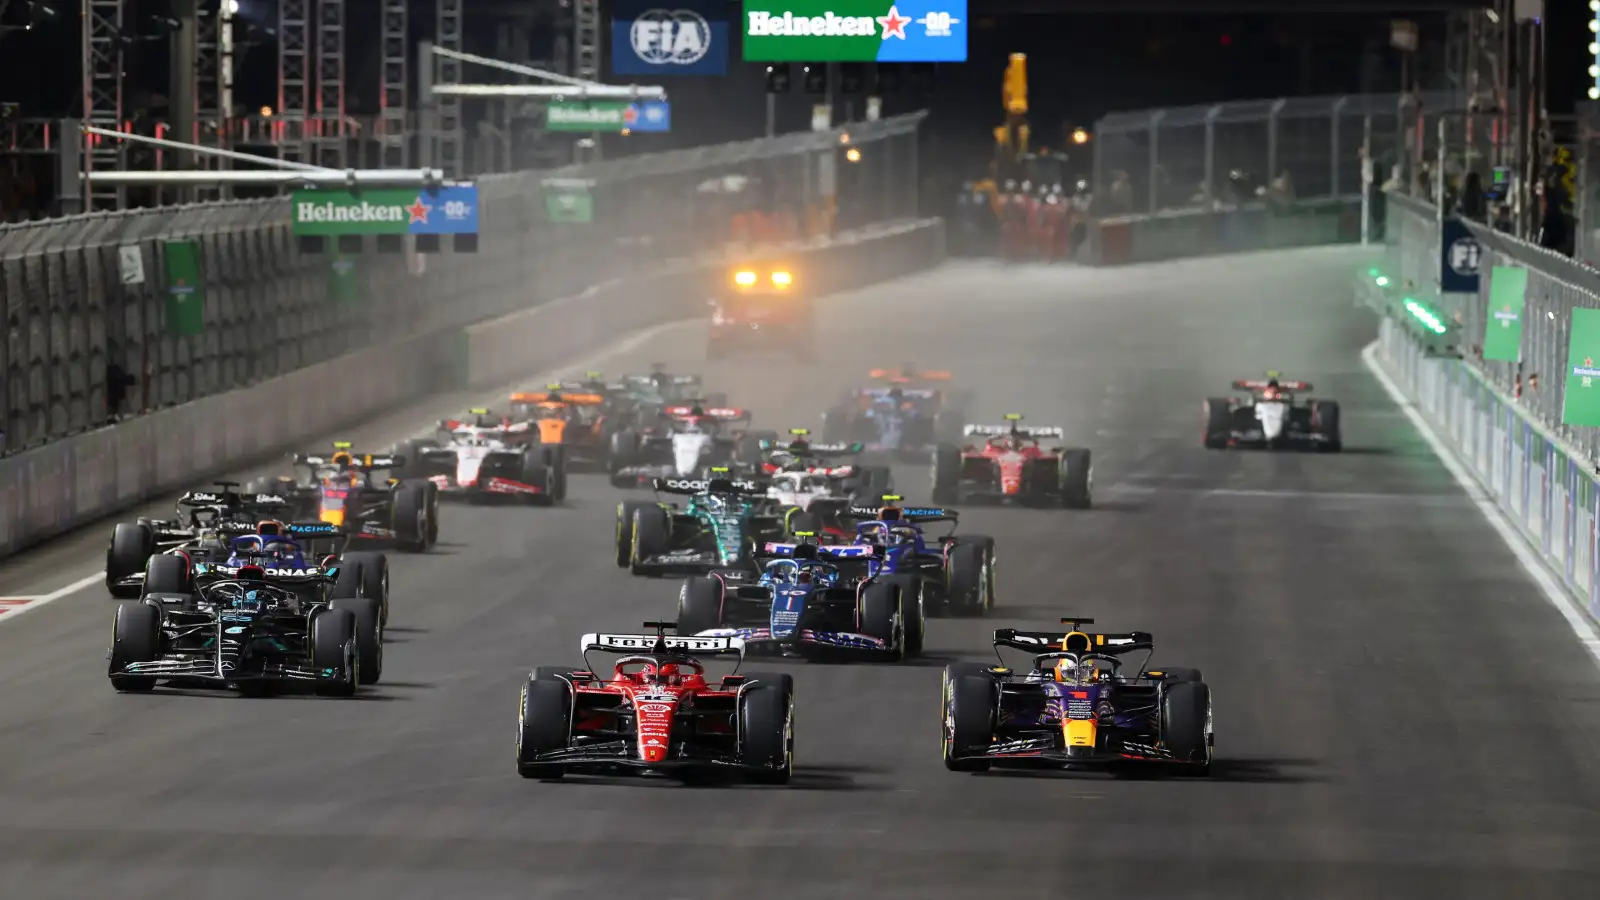 Max Verstappen and Charles Leclerc battle into Turn 1 at the FIA F1 Las Vegas Grand Prix.